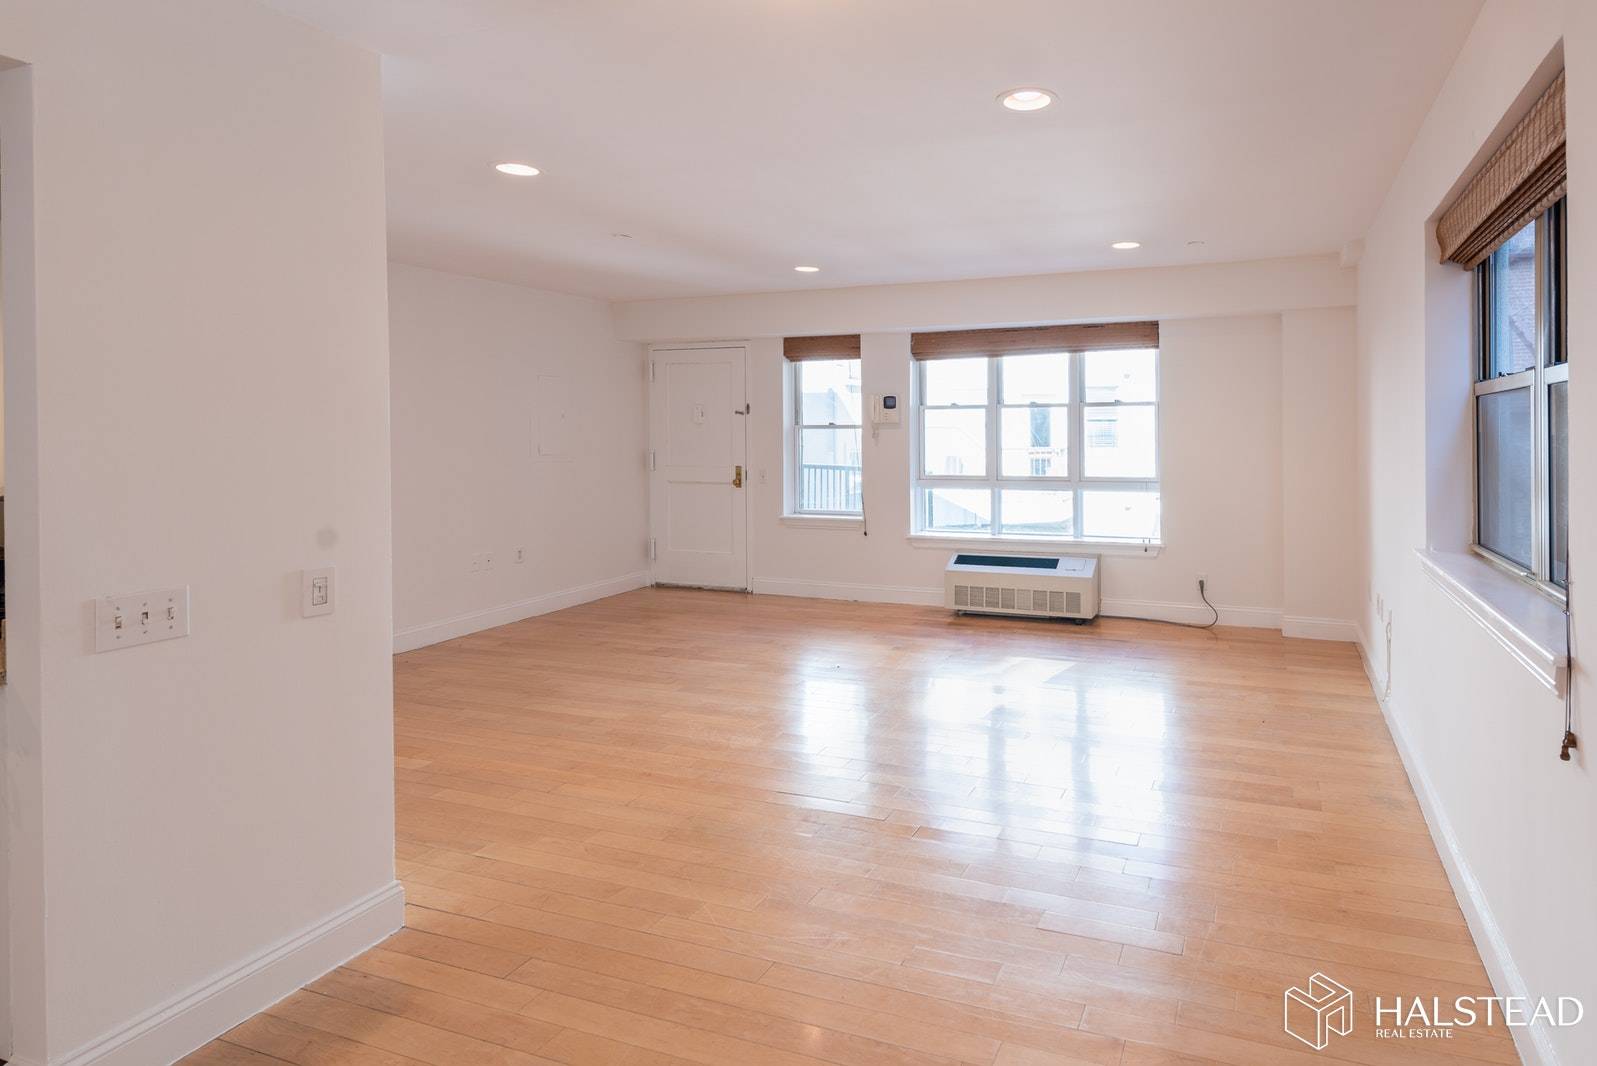 OPEN HOUSE IS BY APPOINTMENT ONLY ONLY 4 PEOPLE WILL BE ABLE TO BE IN THE APARTMENT AT A TIME PLEASE CALL FOR APPOINTMENT at 917 723 3991 Revel in ...